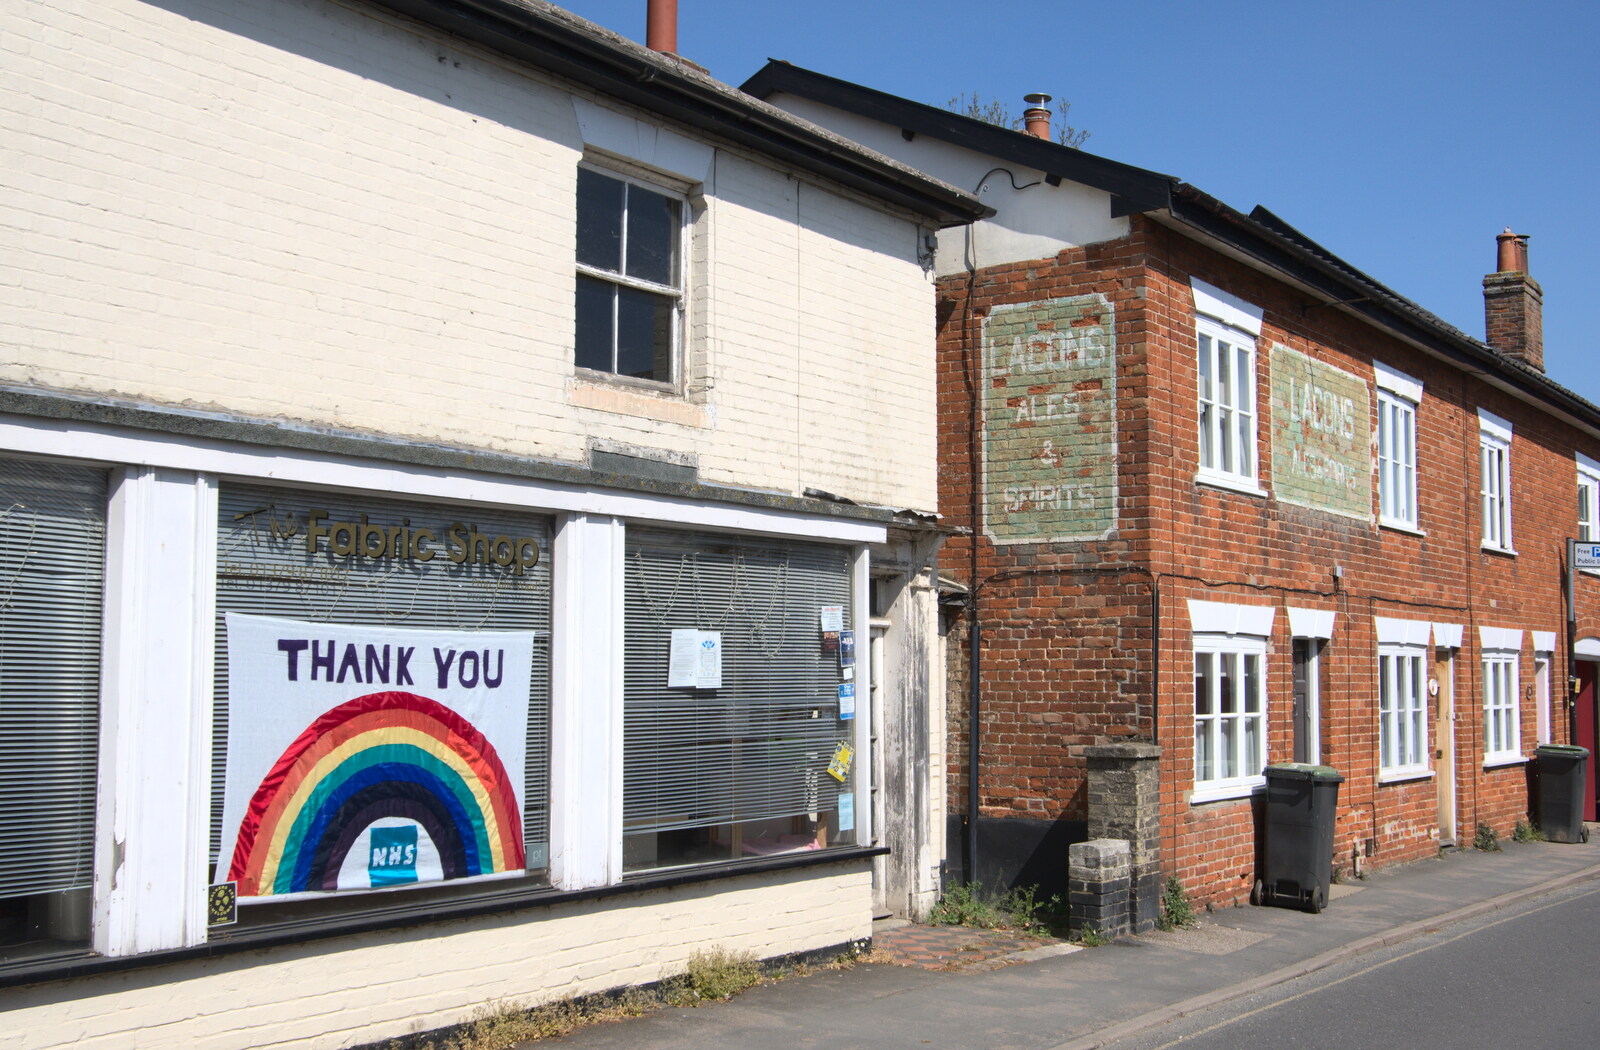 There's a big NHS rainbow in the fabric shop from Lost Cat and a Walk on Nick's Lane, Brome, Suffolk - 26th April 2020